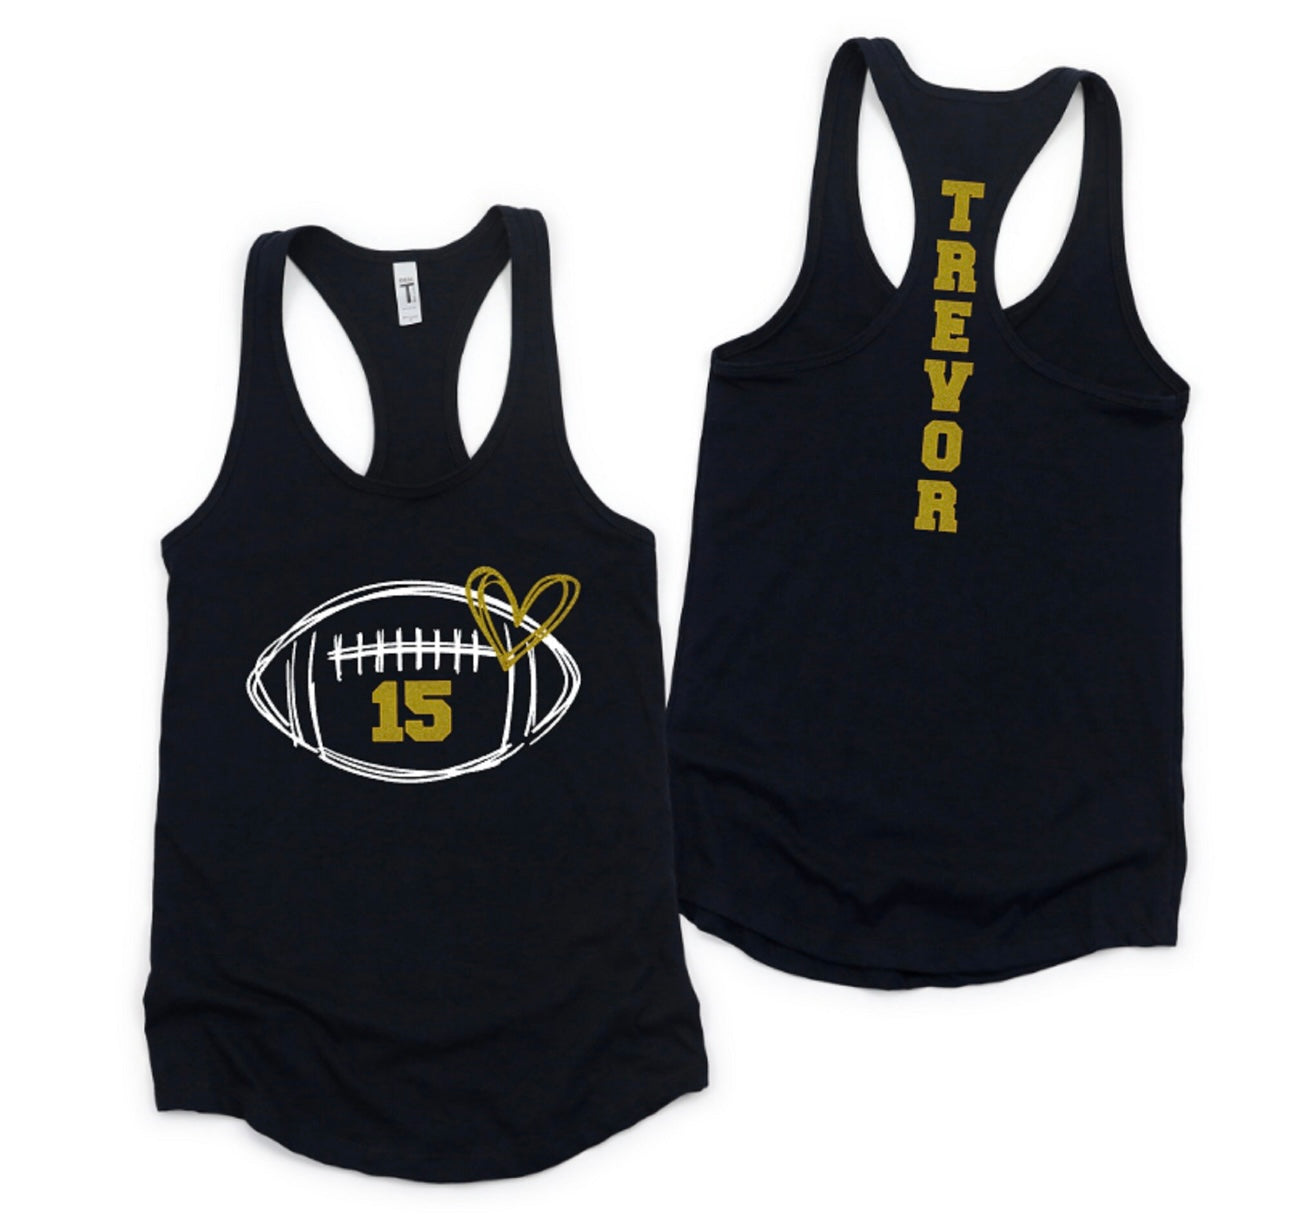 Personalized Sports Top